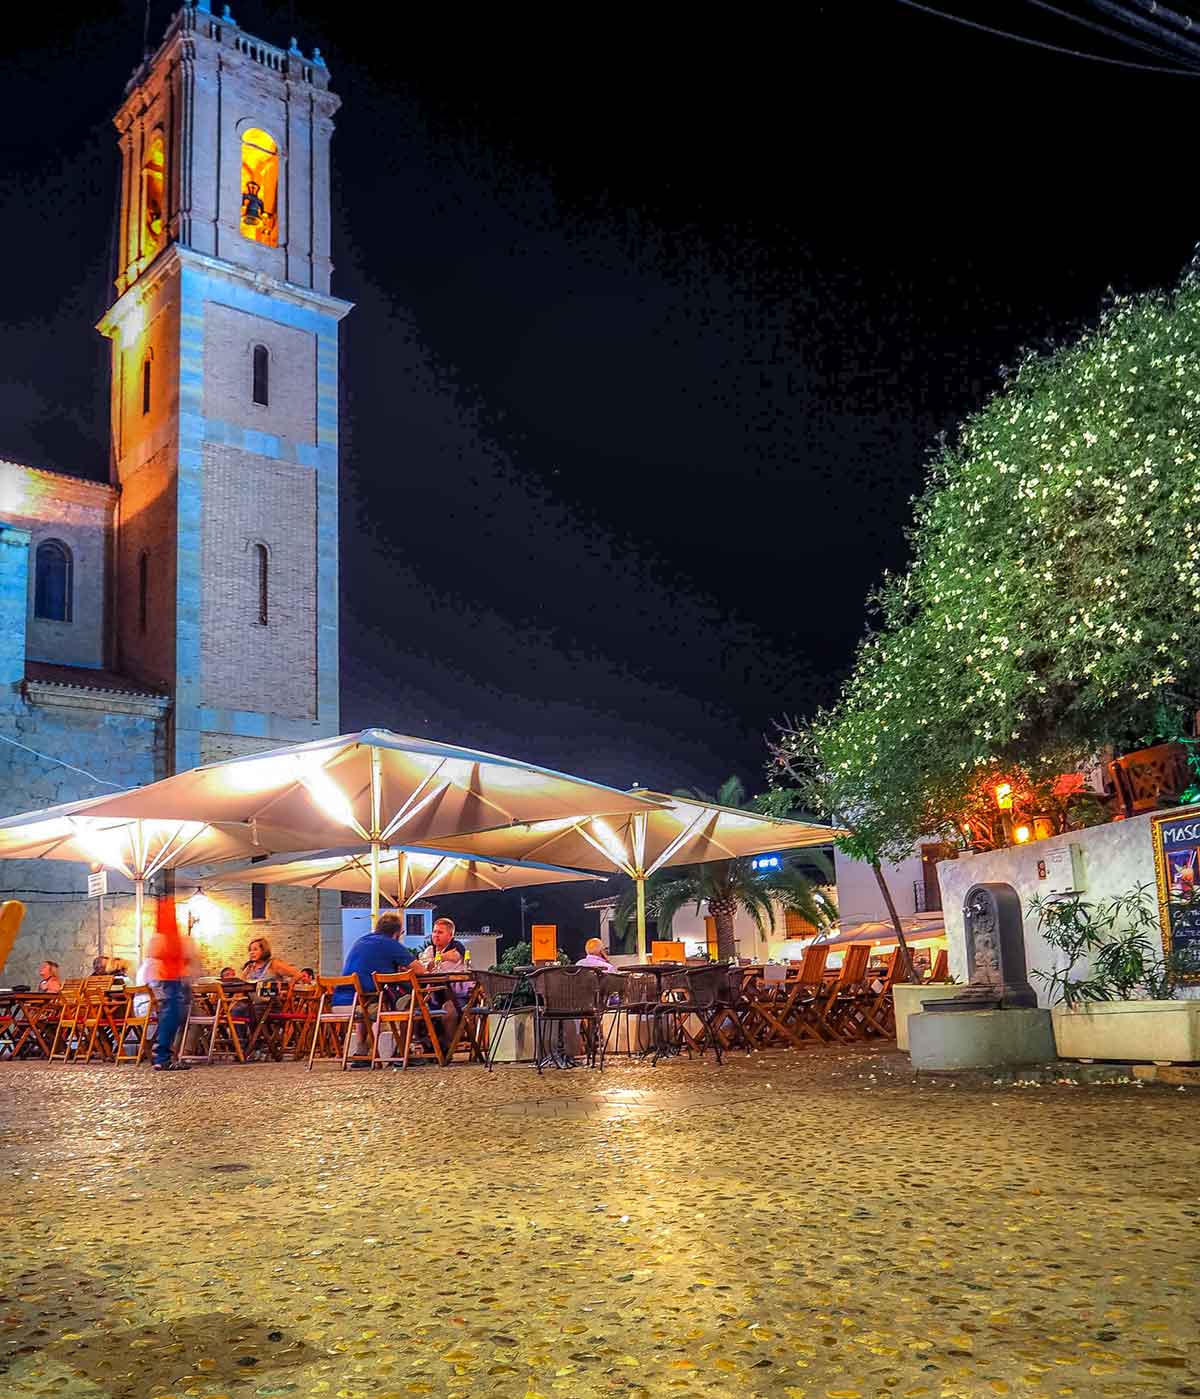 Alfresco Dining is possible for a large part of the year in Altea